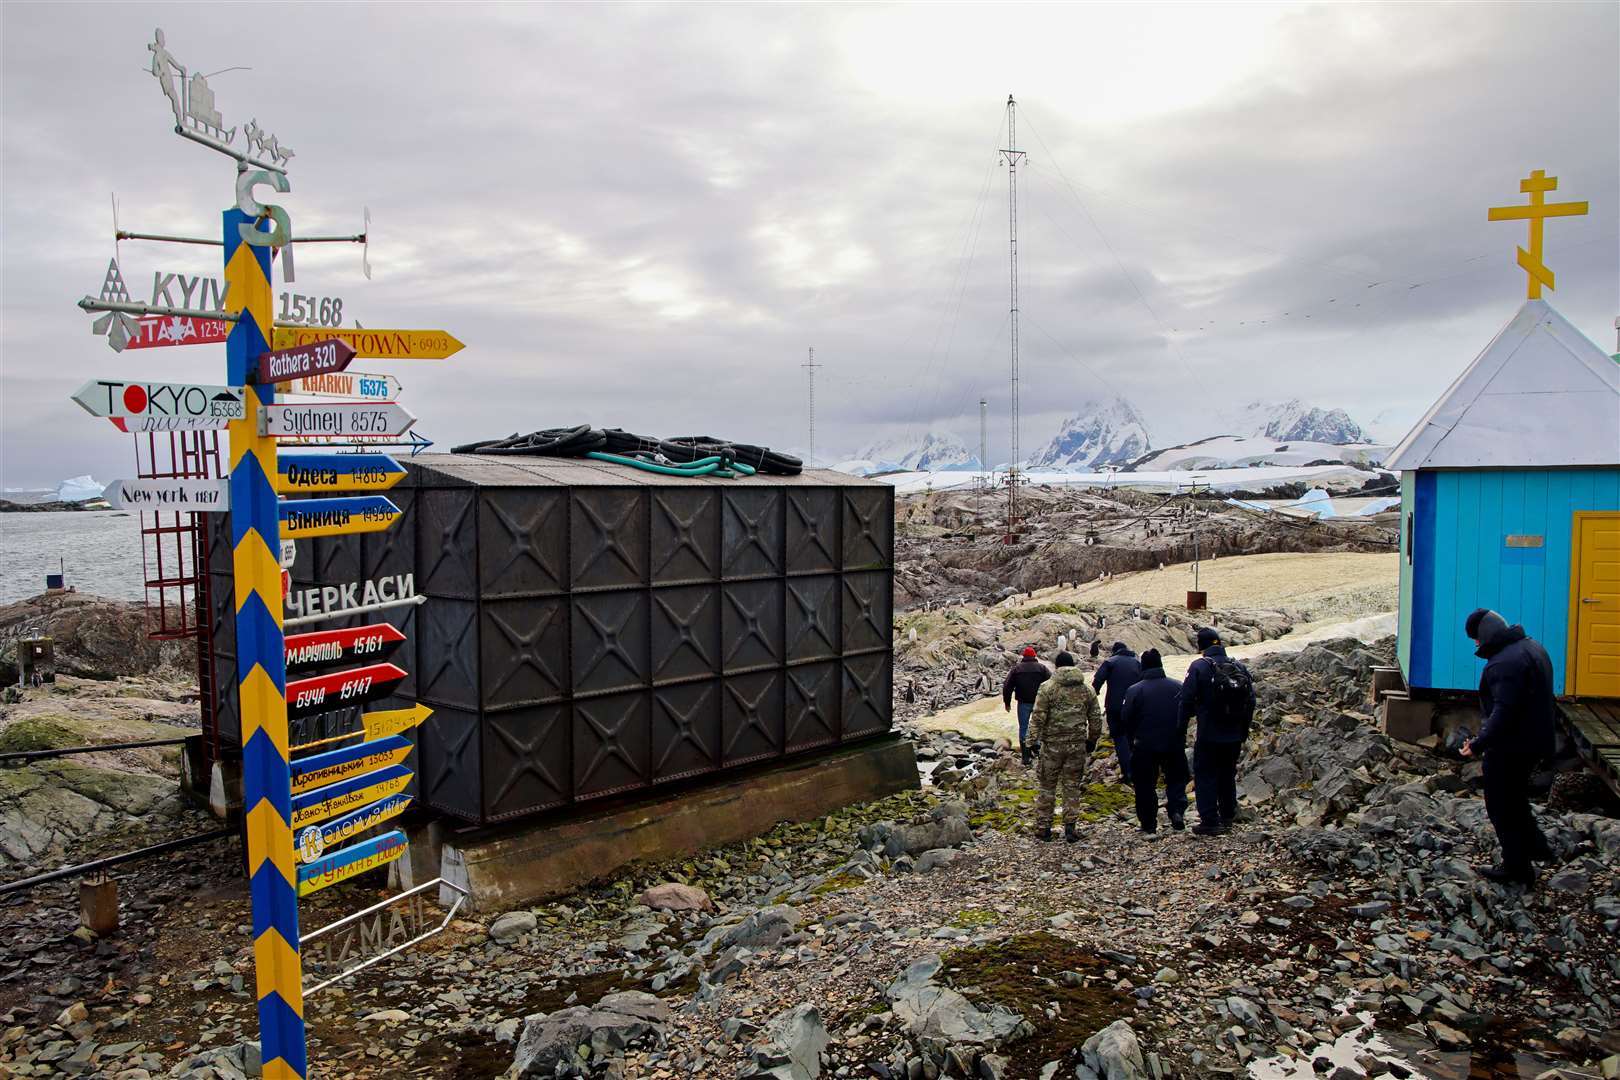 Vernadsky base is the National Antarctic Scientific Centre of Ukraine (Royal Navy/PA)